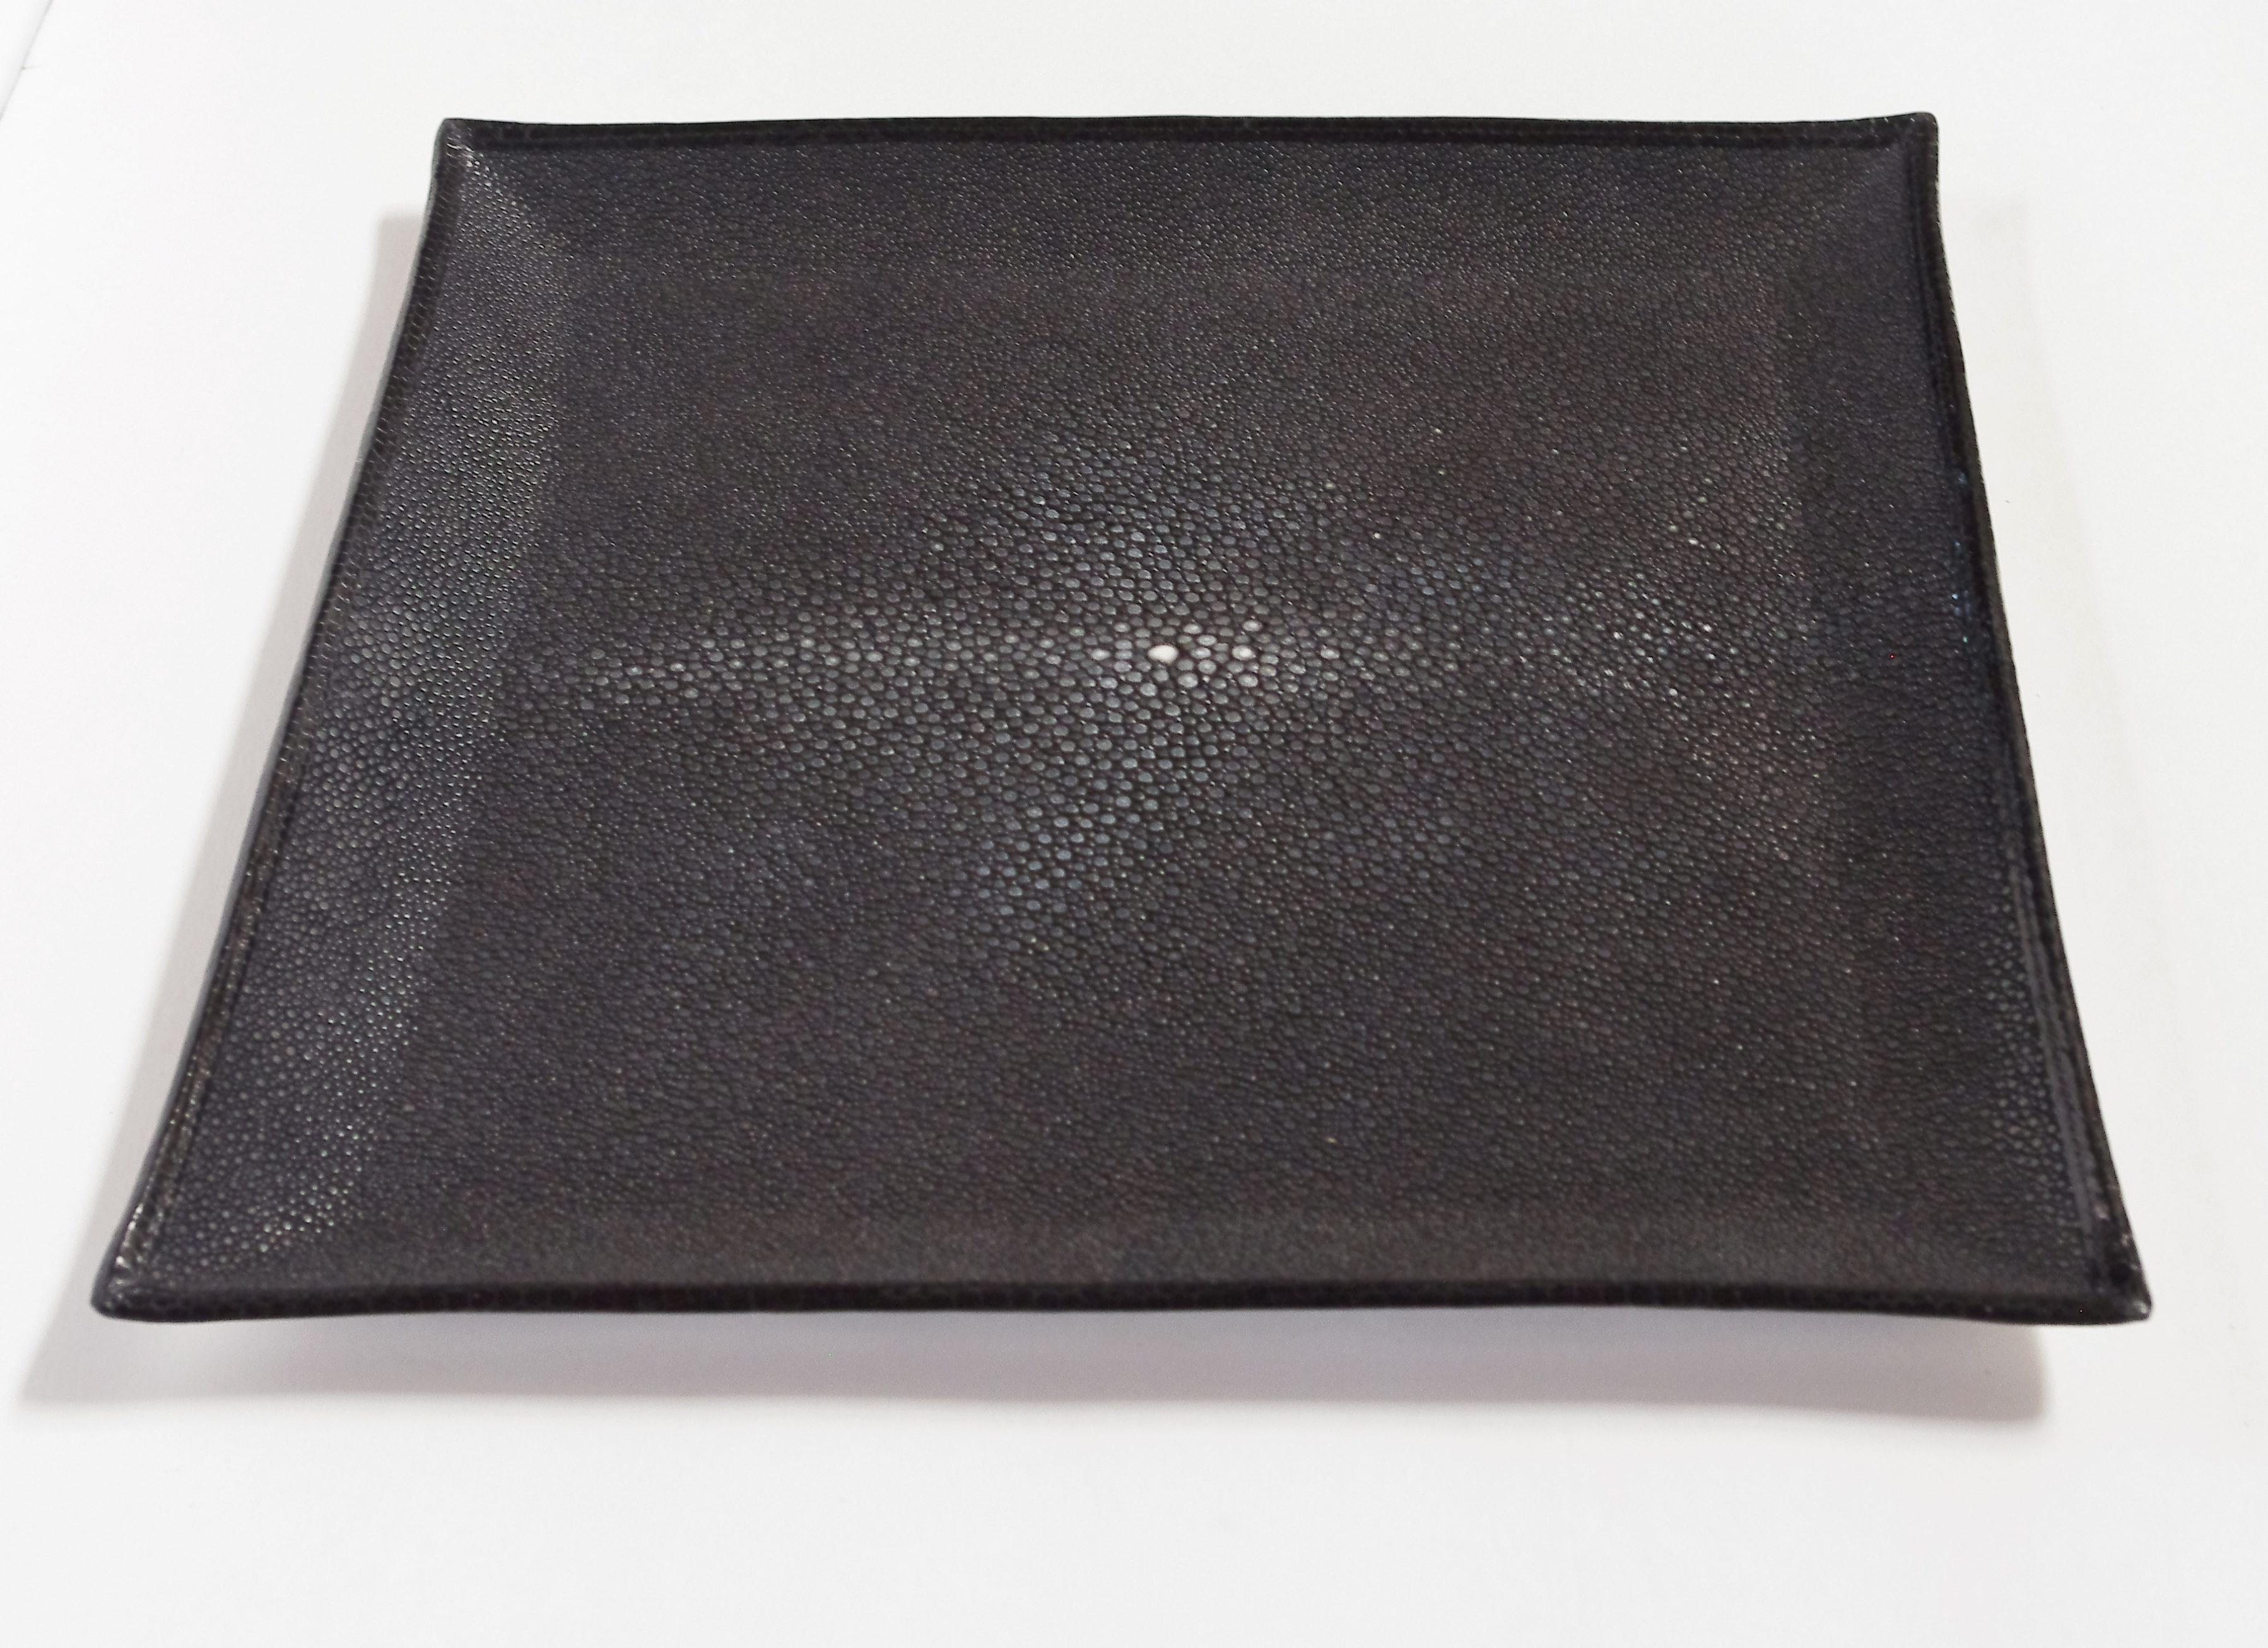 Black shagreen and hand beaten stainless steel tray with black leather presentation box
Designed by Fabio Bergomi for Fabio Ltd / Made in Italy
Measures: Depth 12.5 inches, width 12.5 inches, height 1 inch
1 in stock in Los Angeles
Order reference